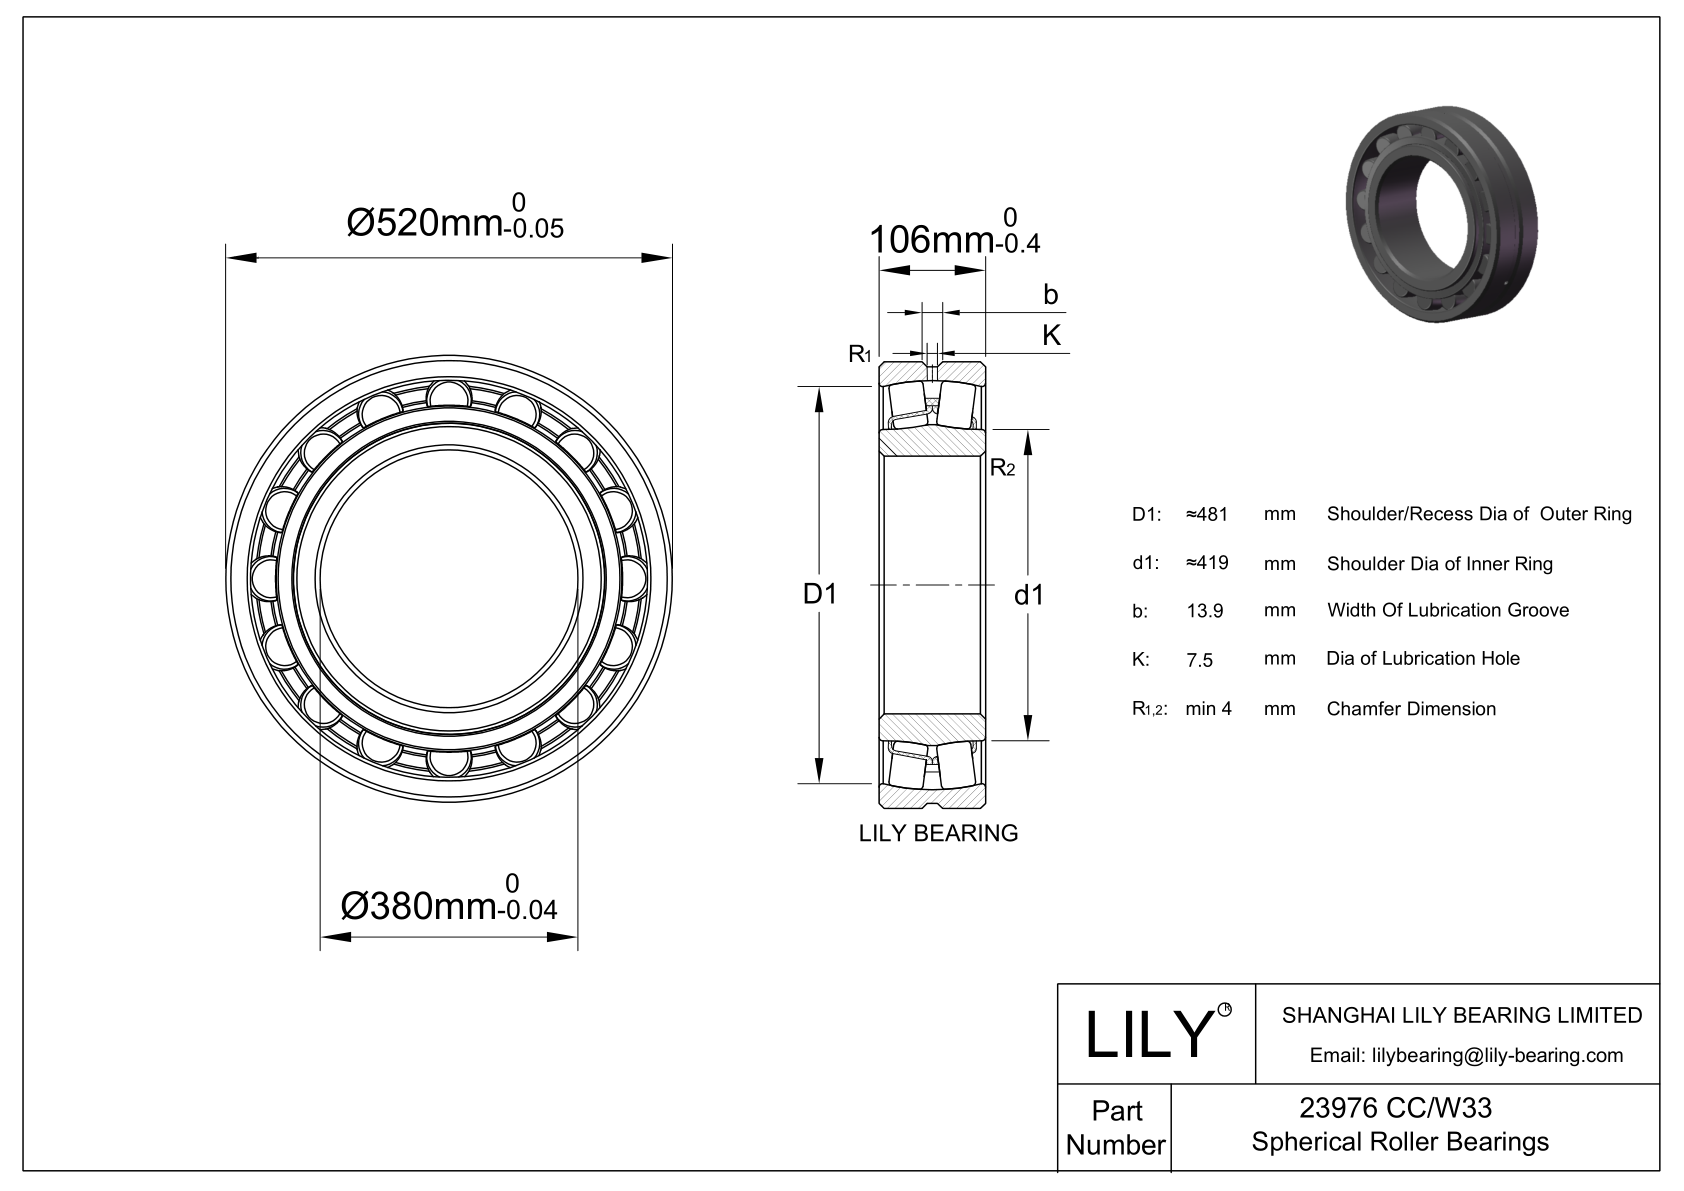 23976 CC/W33 Double Row Spherical Roller Bearing cad drawing